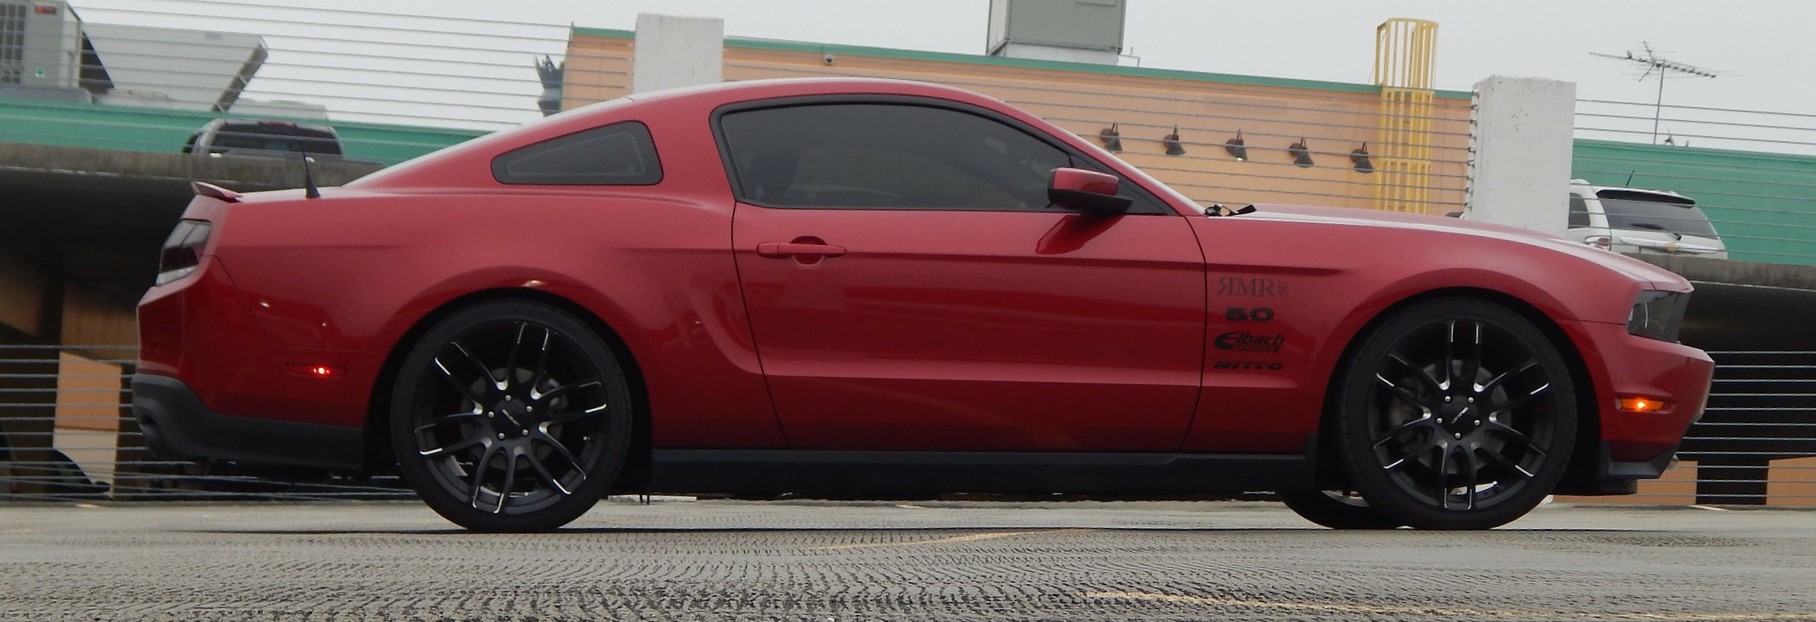 Red Mustang in Fayetteville, North Carolina | Breast Cancer Car Donations